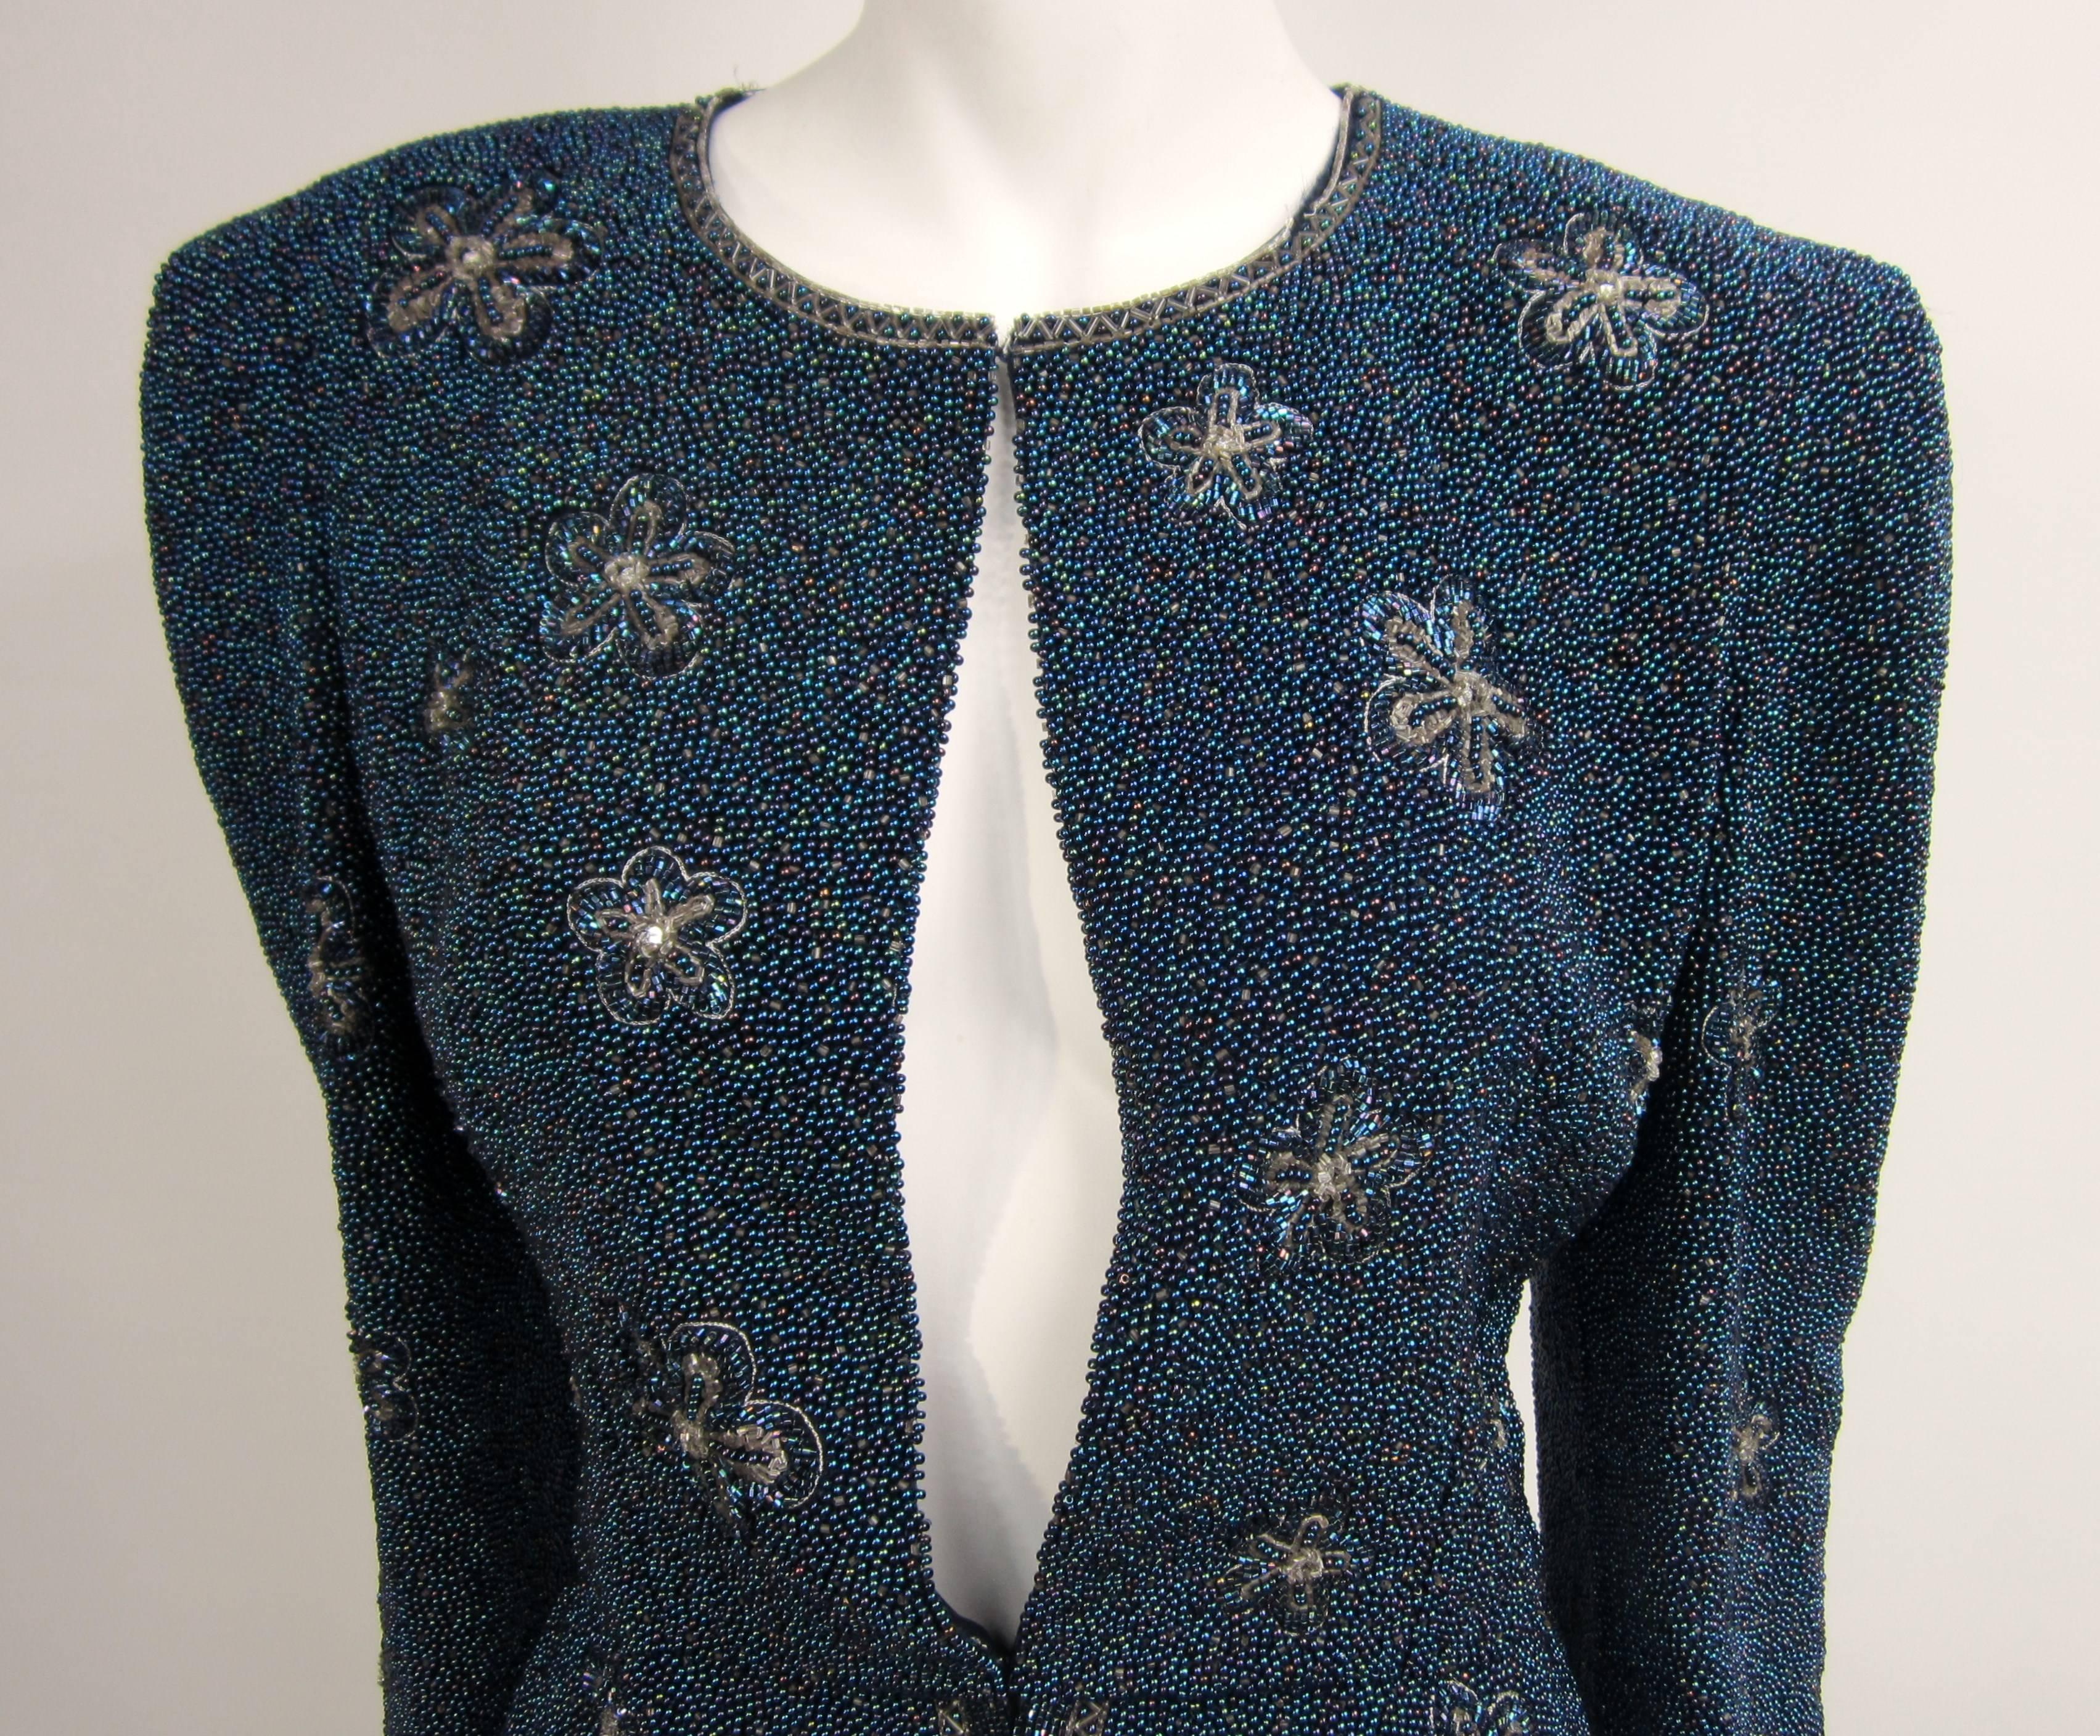 Totally beaded Carolina Herrera Jacket. The entire jacket is covered in stunning aurora borealis beading. Scalloped hem. 2 clip closure. Will fit a 2-4 Measuring Up to 34-inch bust, up to 29-inch waist and length is 22 inches. XS. Labeled an 8